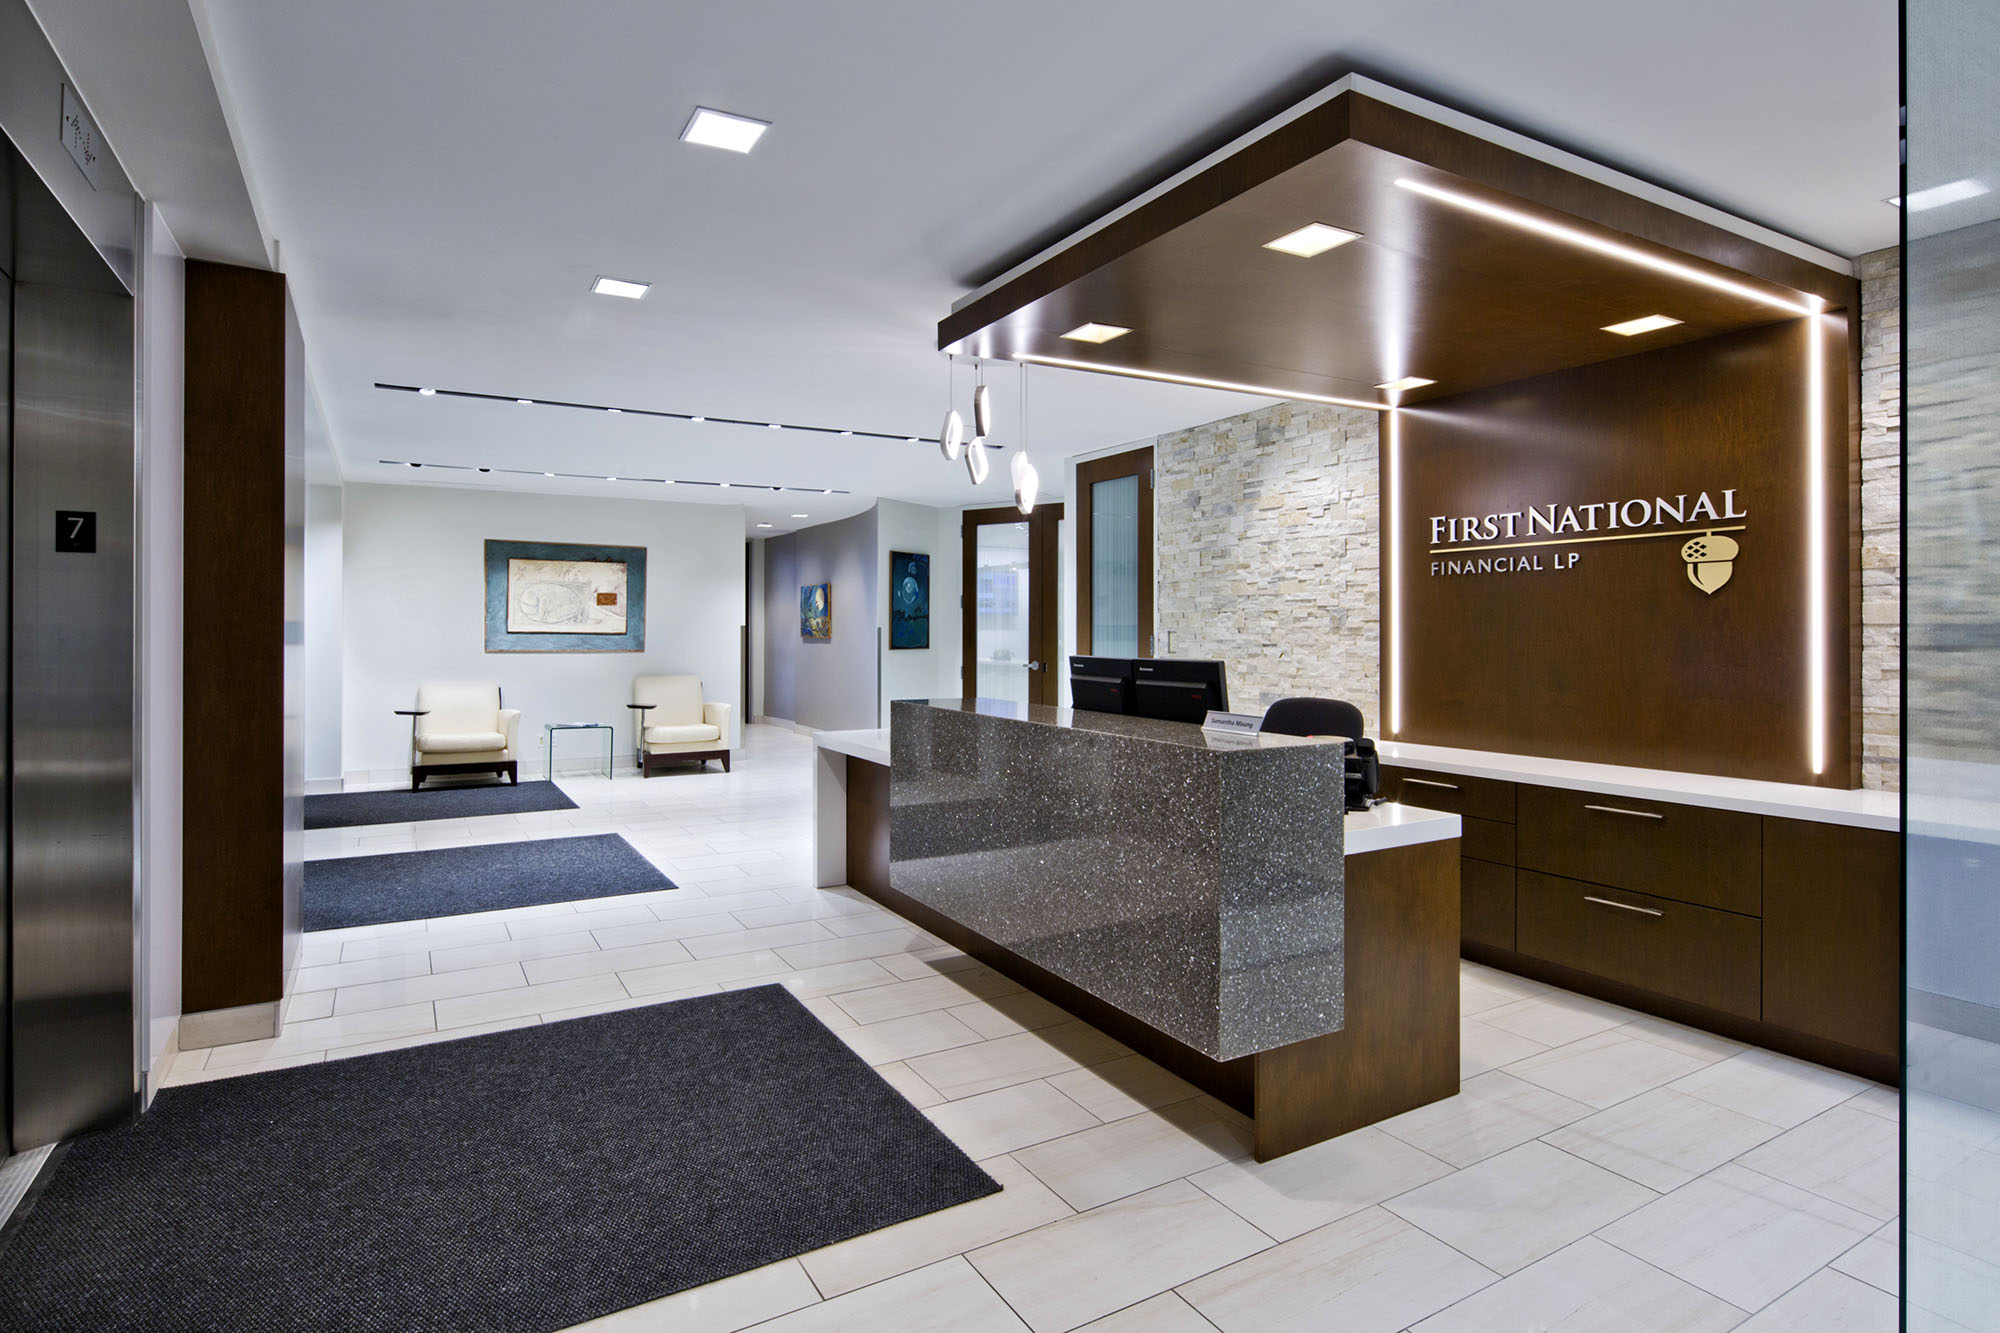  Reception area of an office